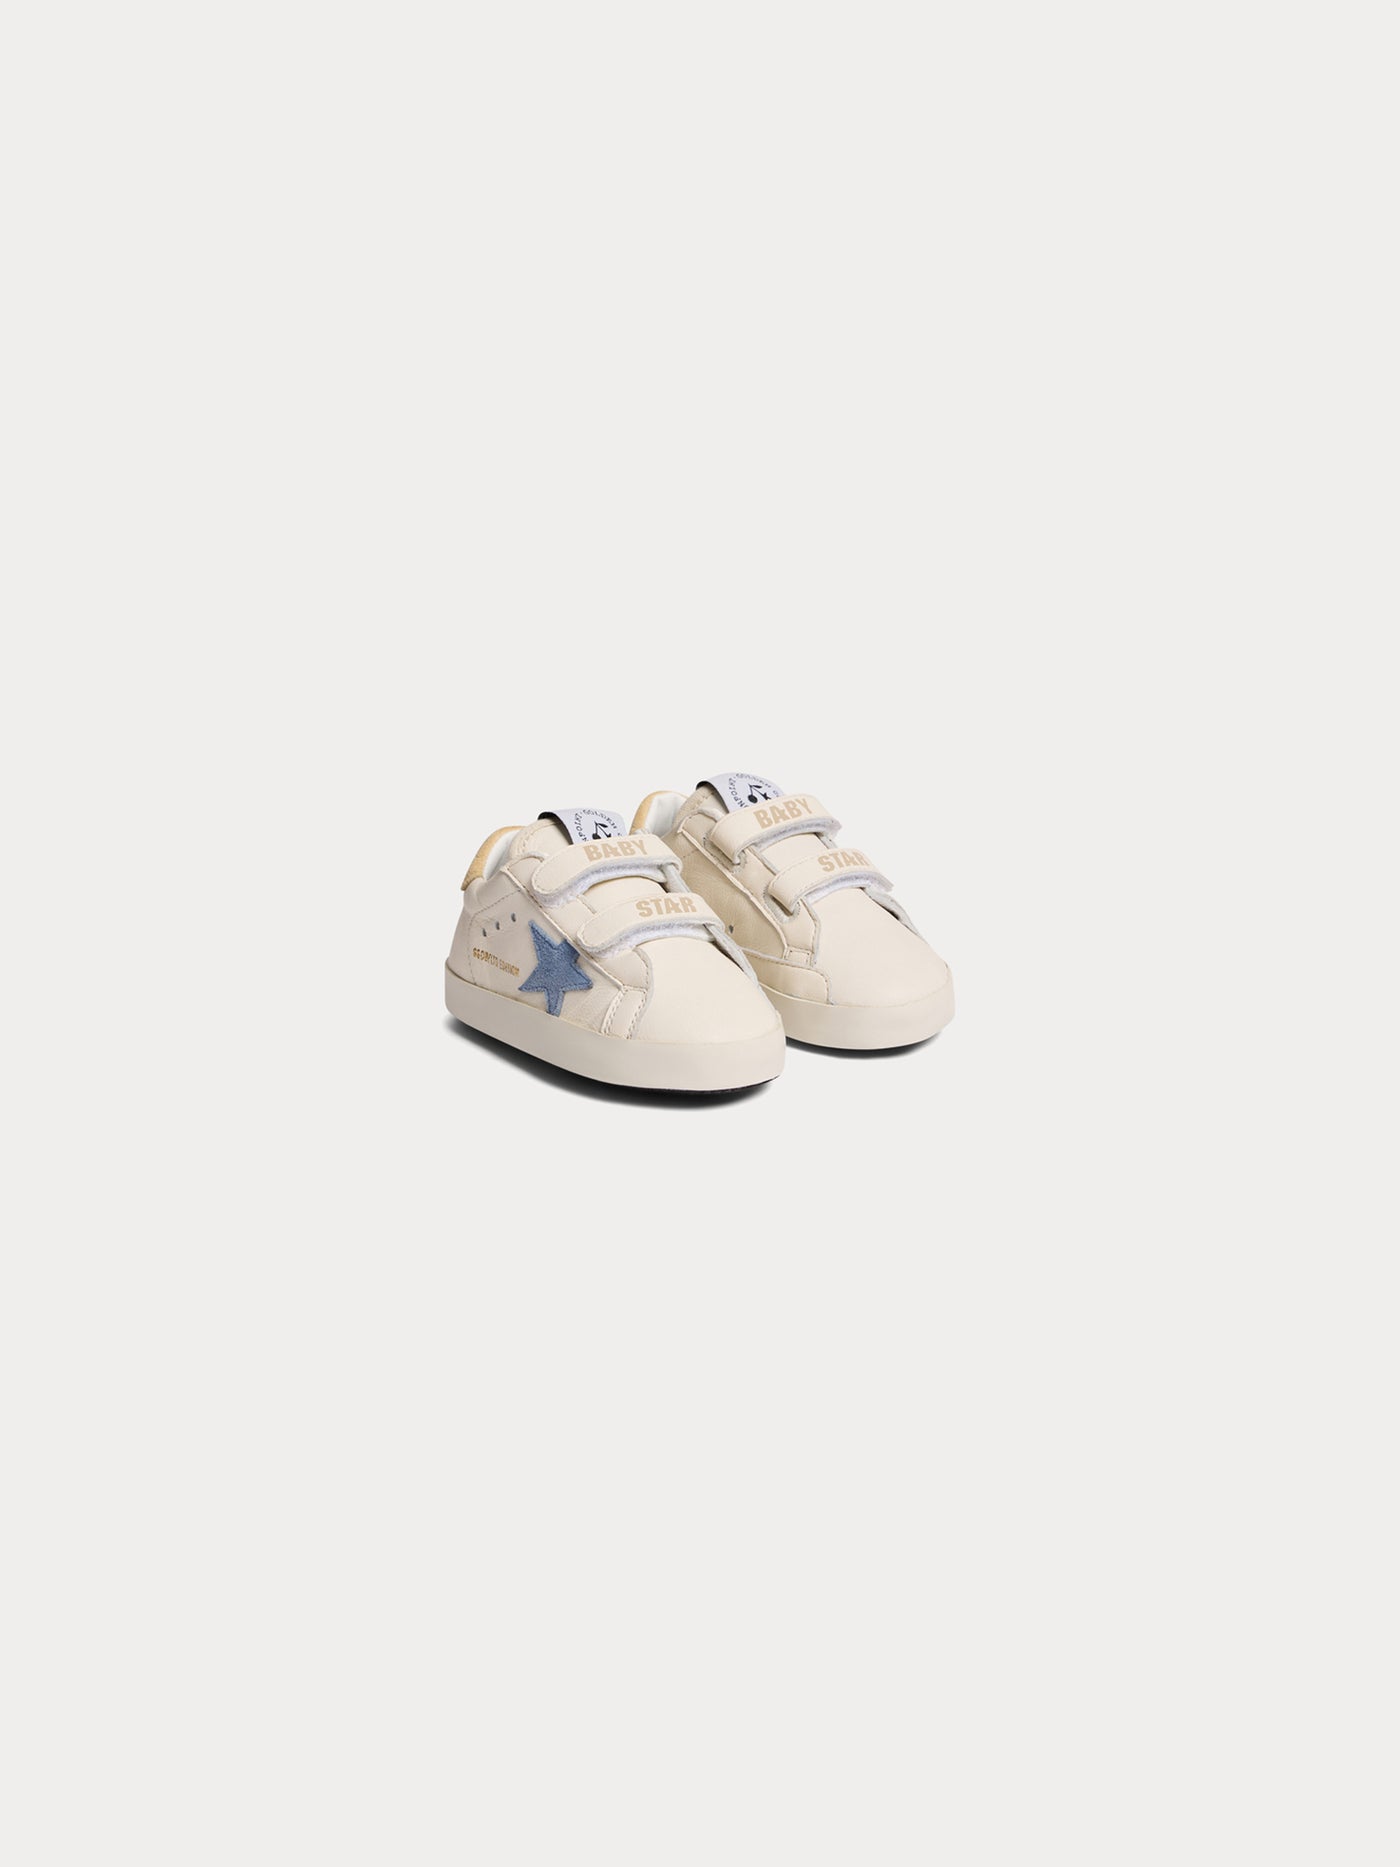 Bonpoint x Golden Goose Sneakers natural white